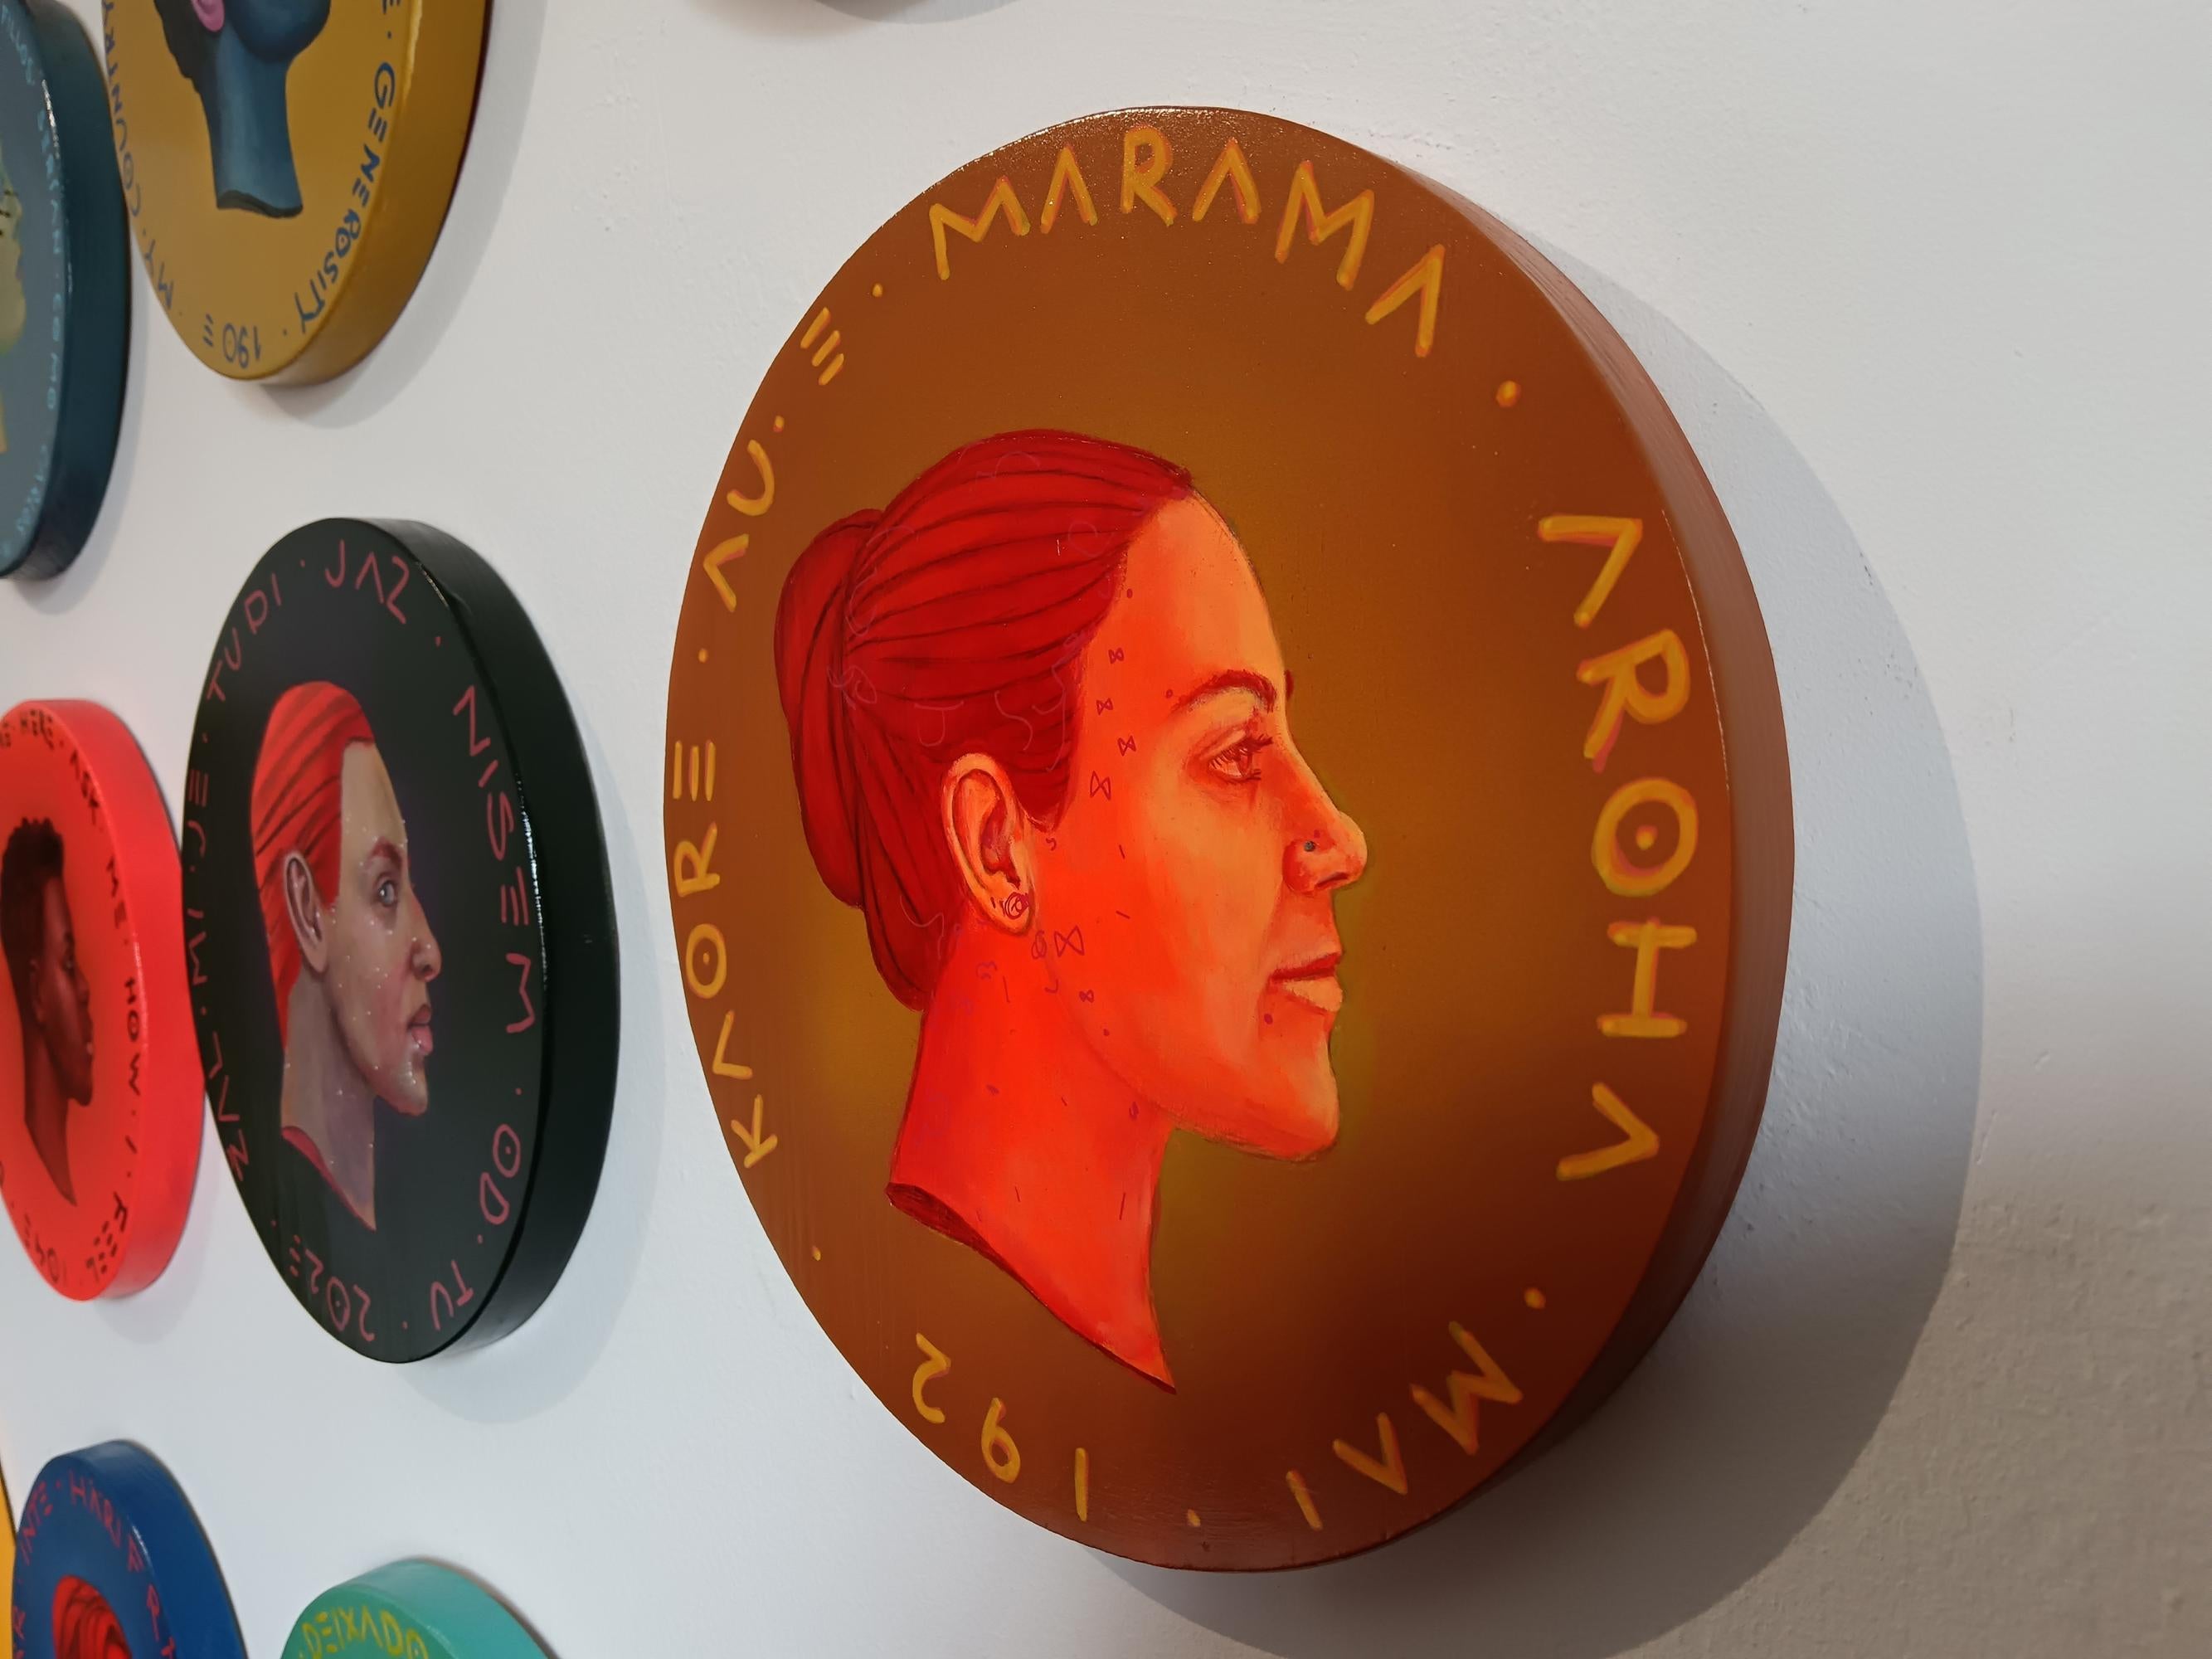 This piece, belonging to Natasha Lelenco's Exchange Currencies series, features a profile portrait of a woman on a circular wooden surface that emulates a coin. On the coin, the Maori phrase 